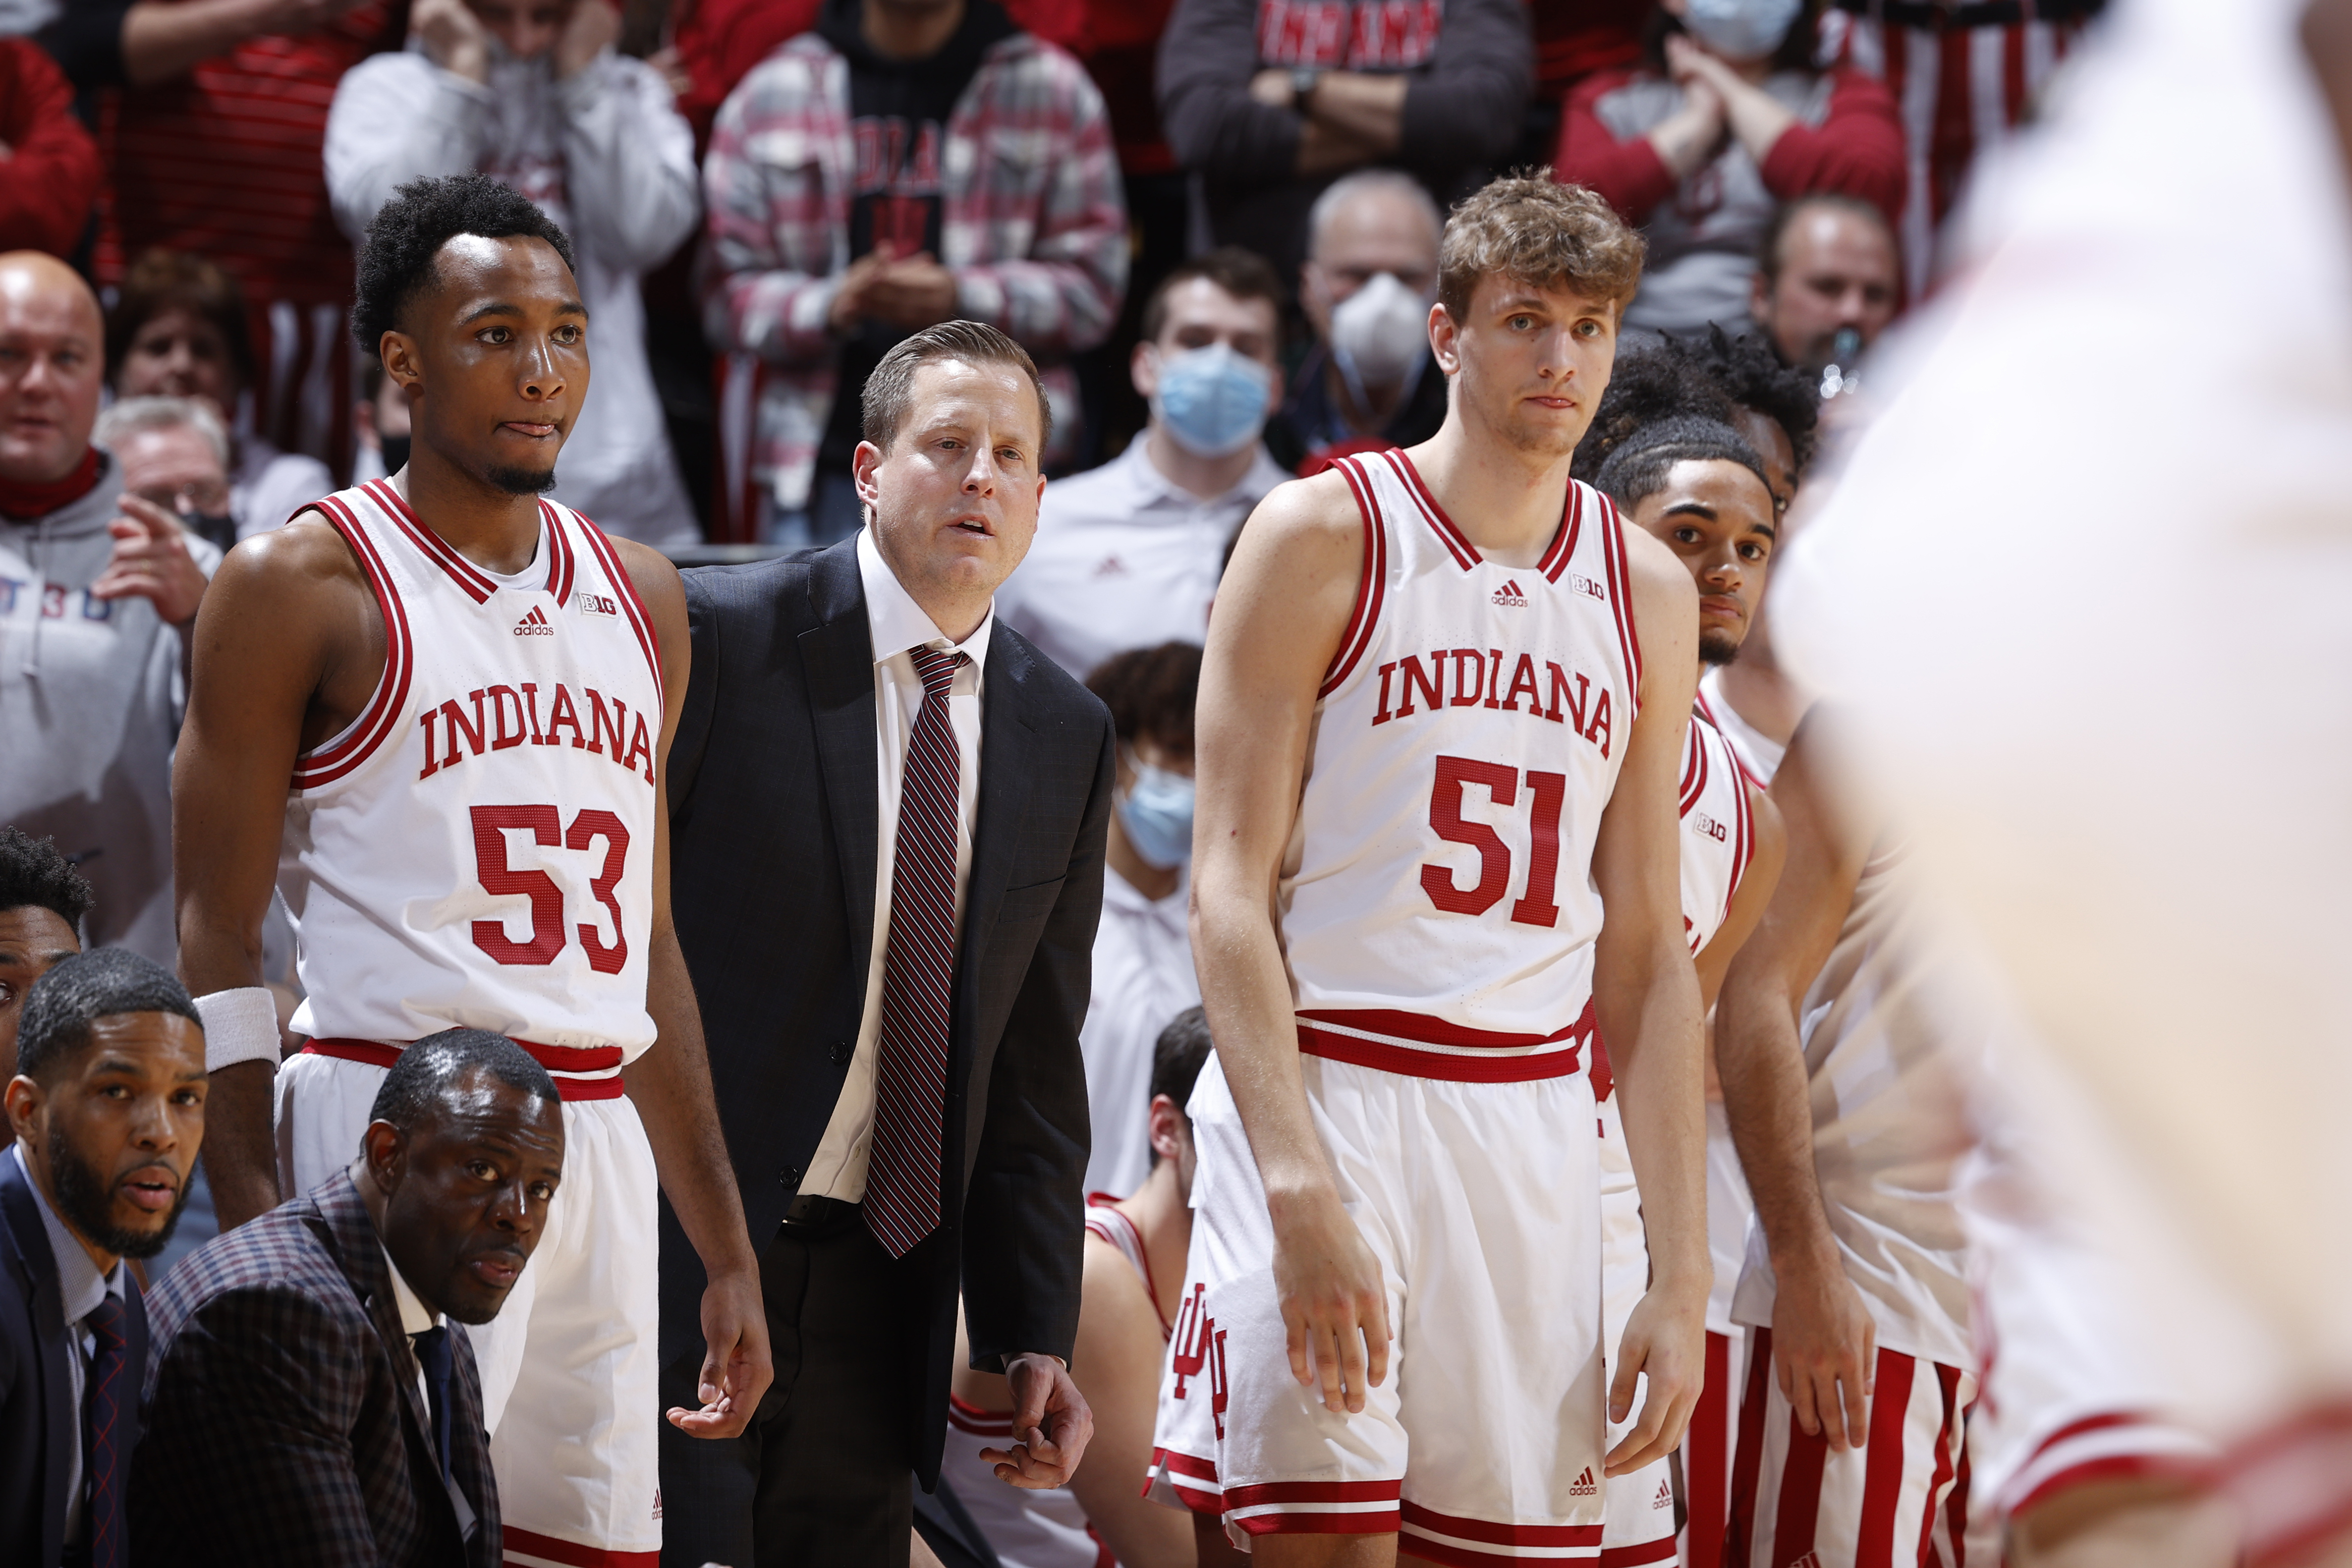 COLLEGE BASKETBALL: FEB 15 Wisconsin at Indiana